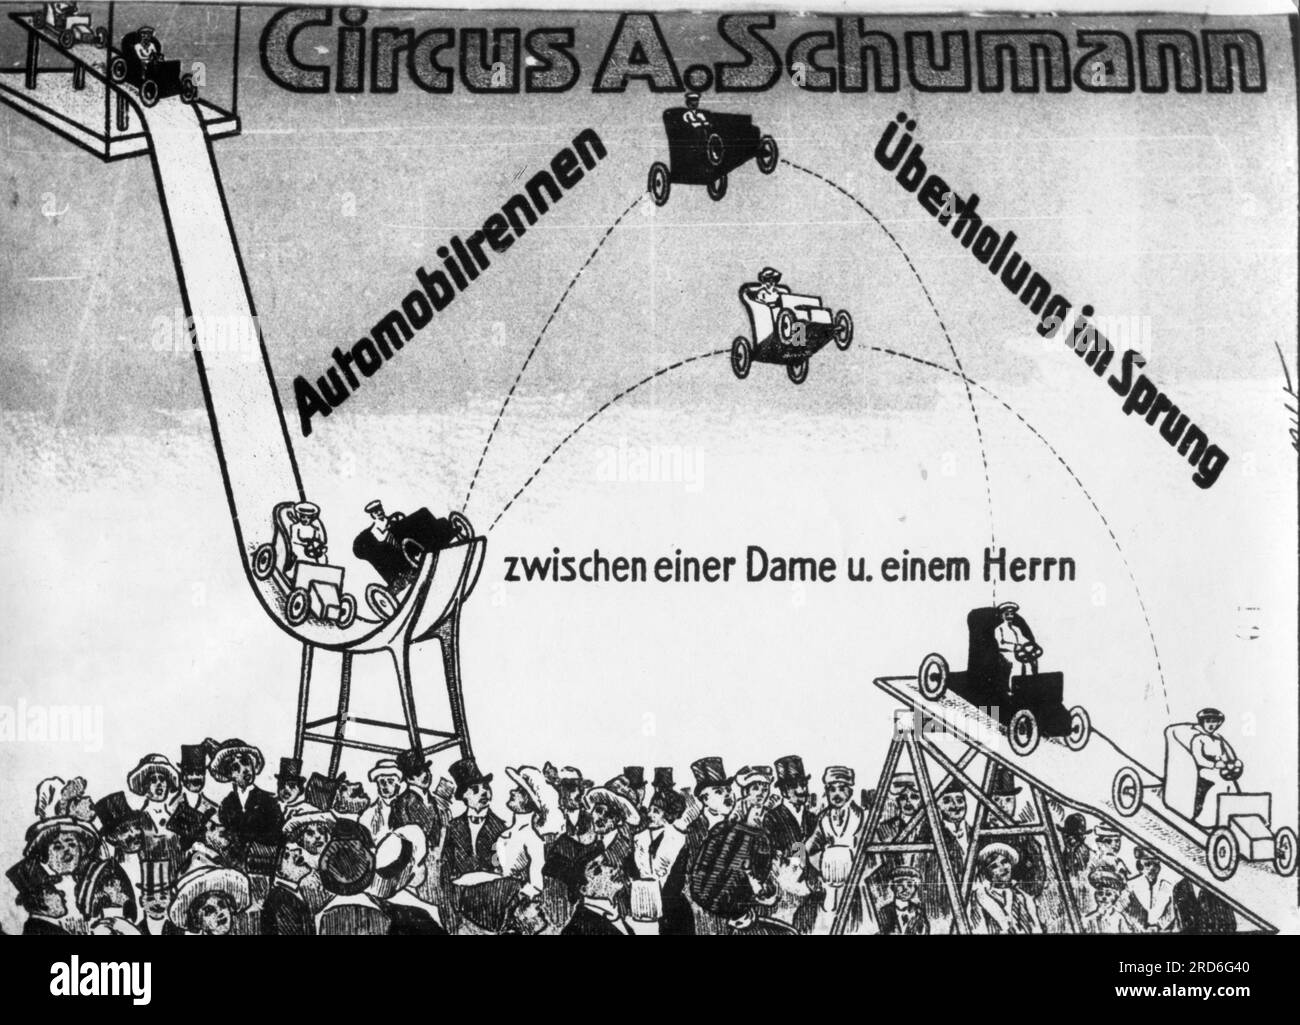 circus, Circus Albert Schumann, advertising poster, circa 1900, ADDITIONAL-RIGHTS-CLEARANCE-INFO-NOT-AVAILABLE Stock Photo